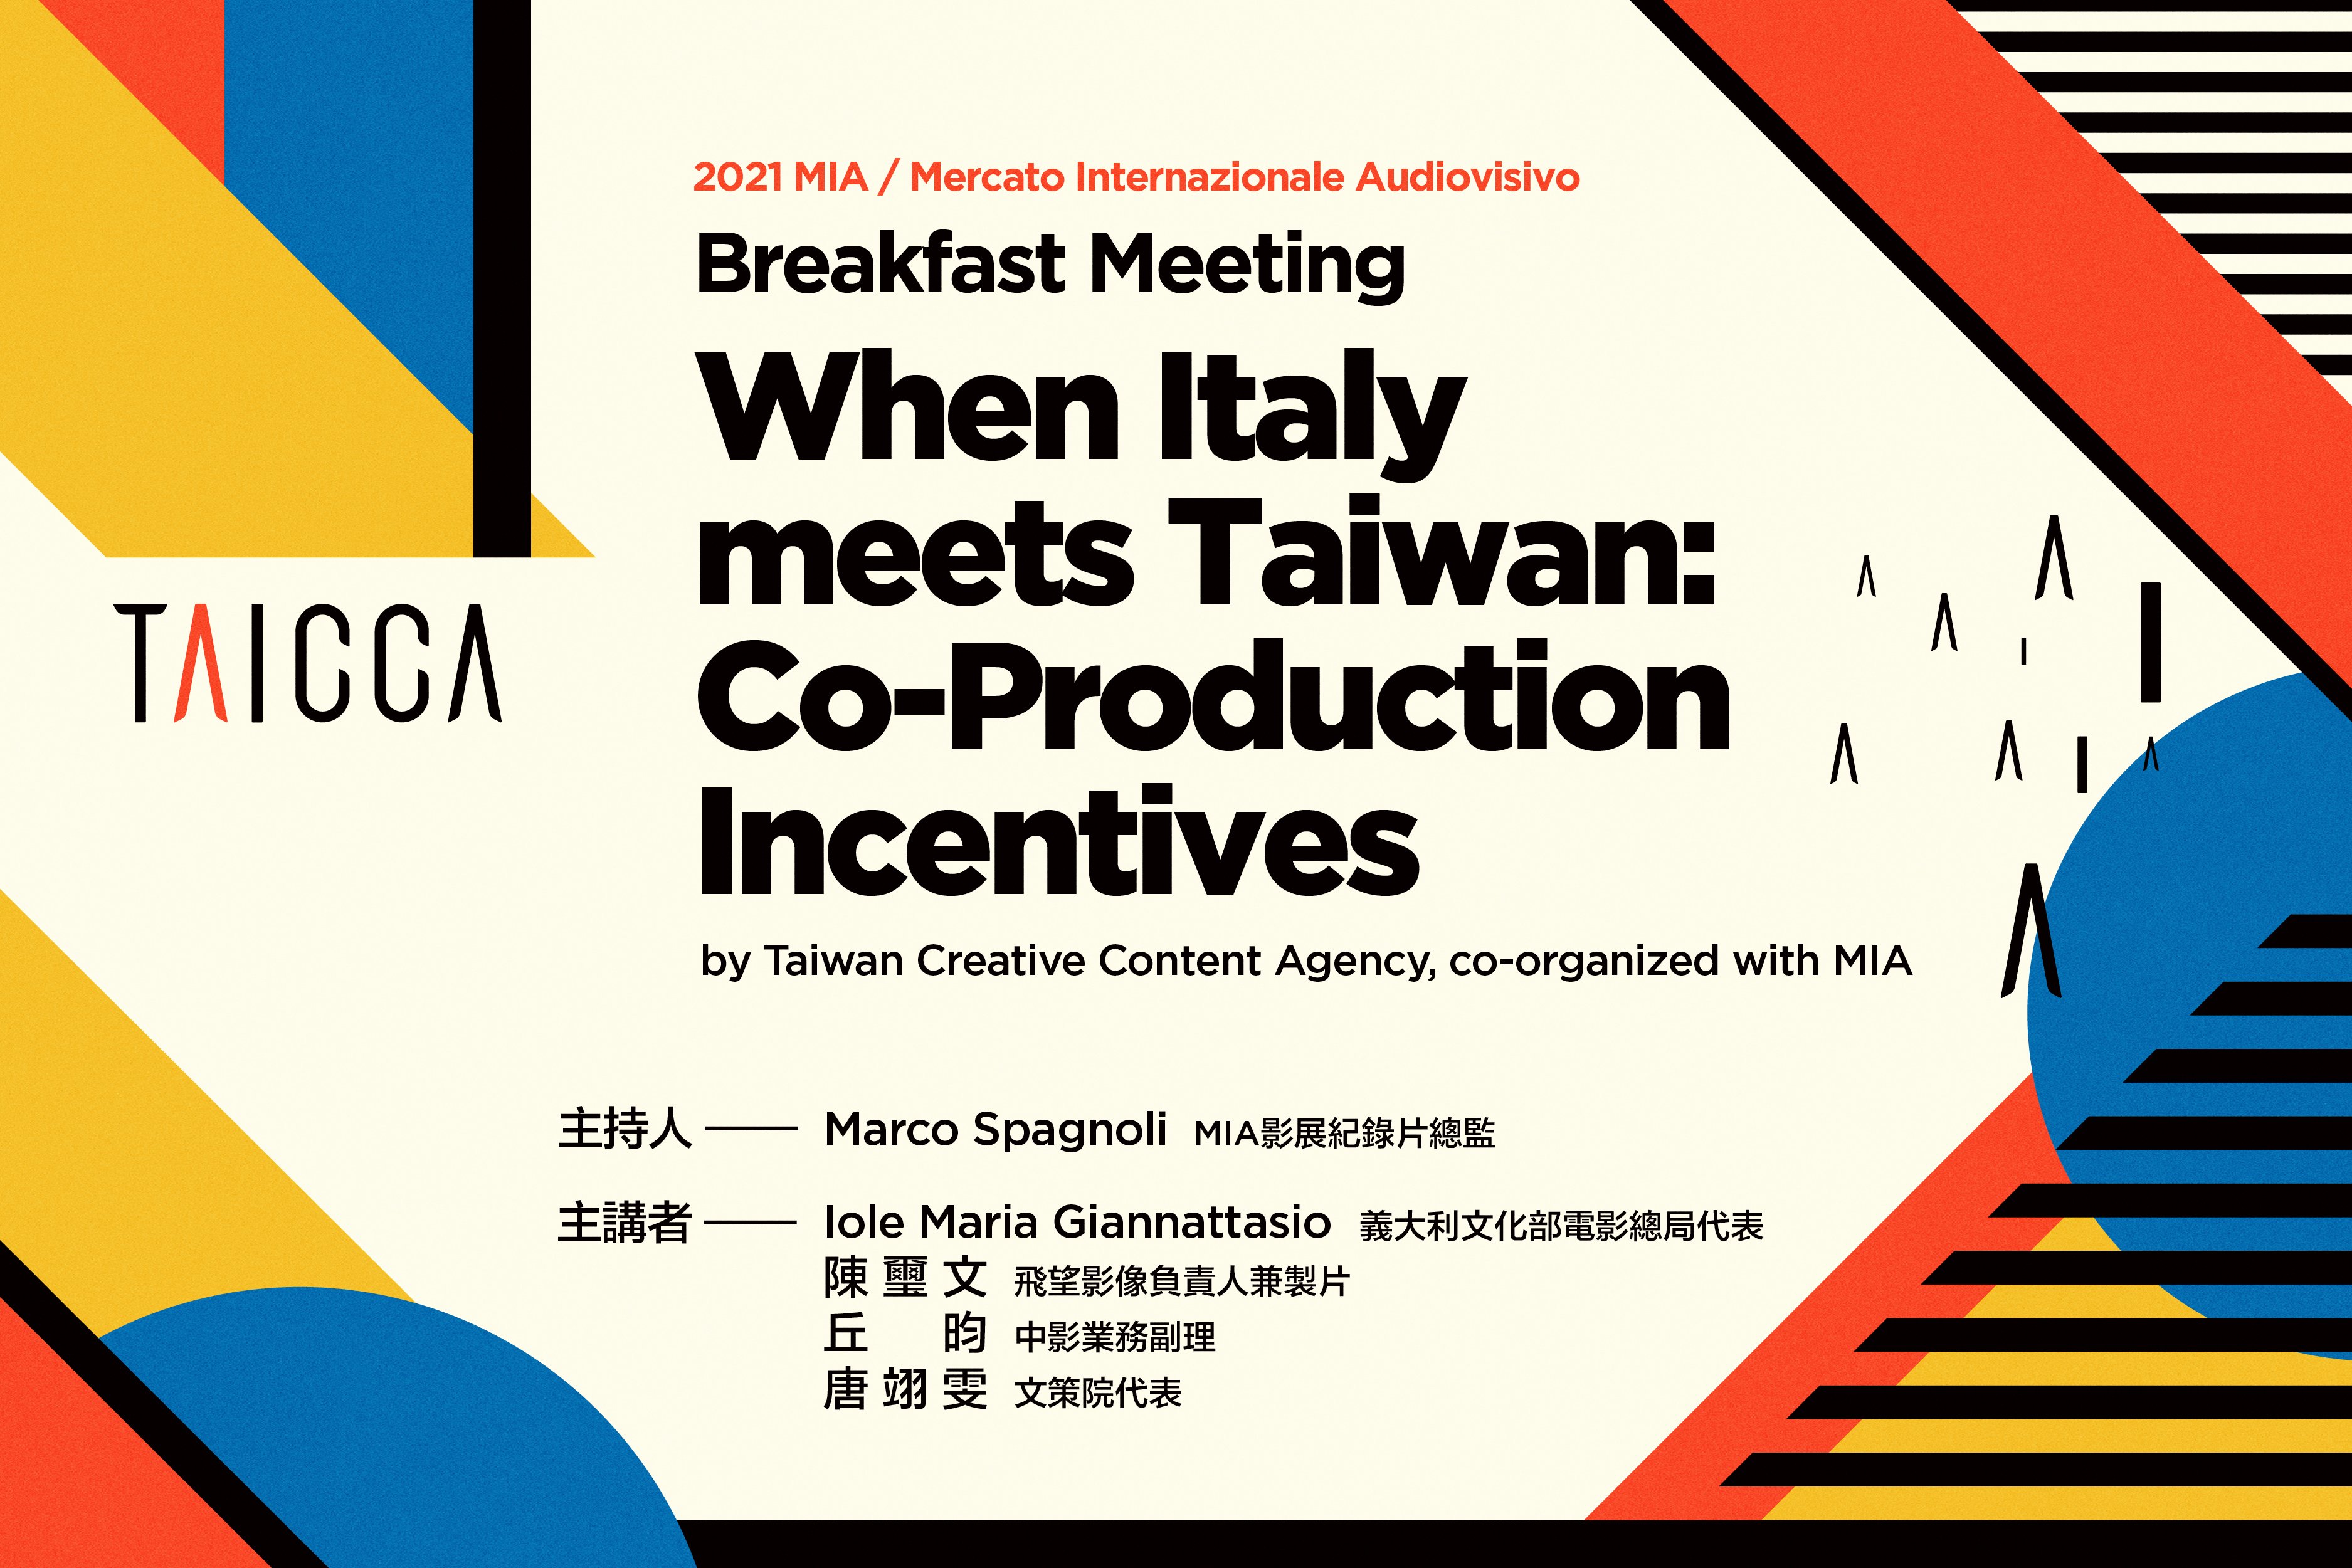 TAICCA Participates in the MIA International Audiovisual Market for the First Time, Encourages More International Co-Productions with Taiwan 